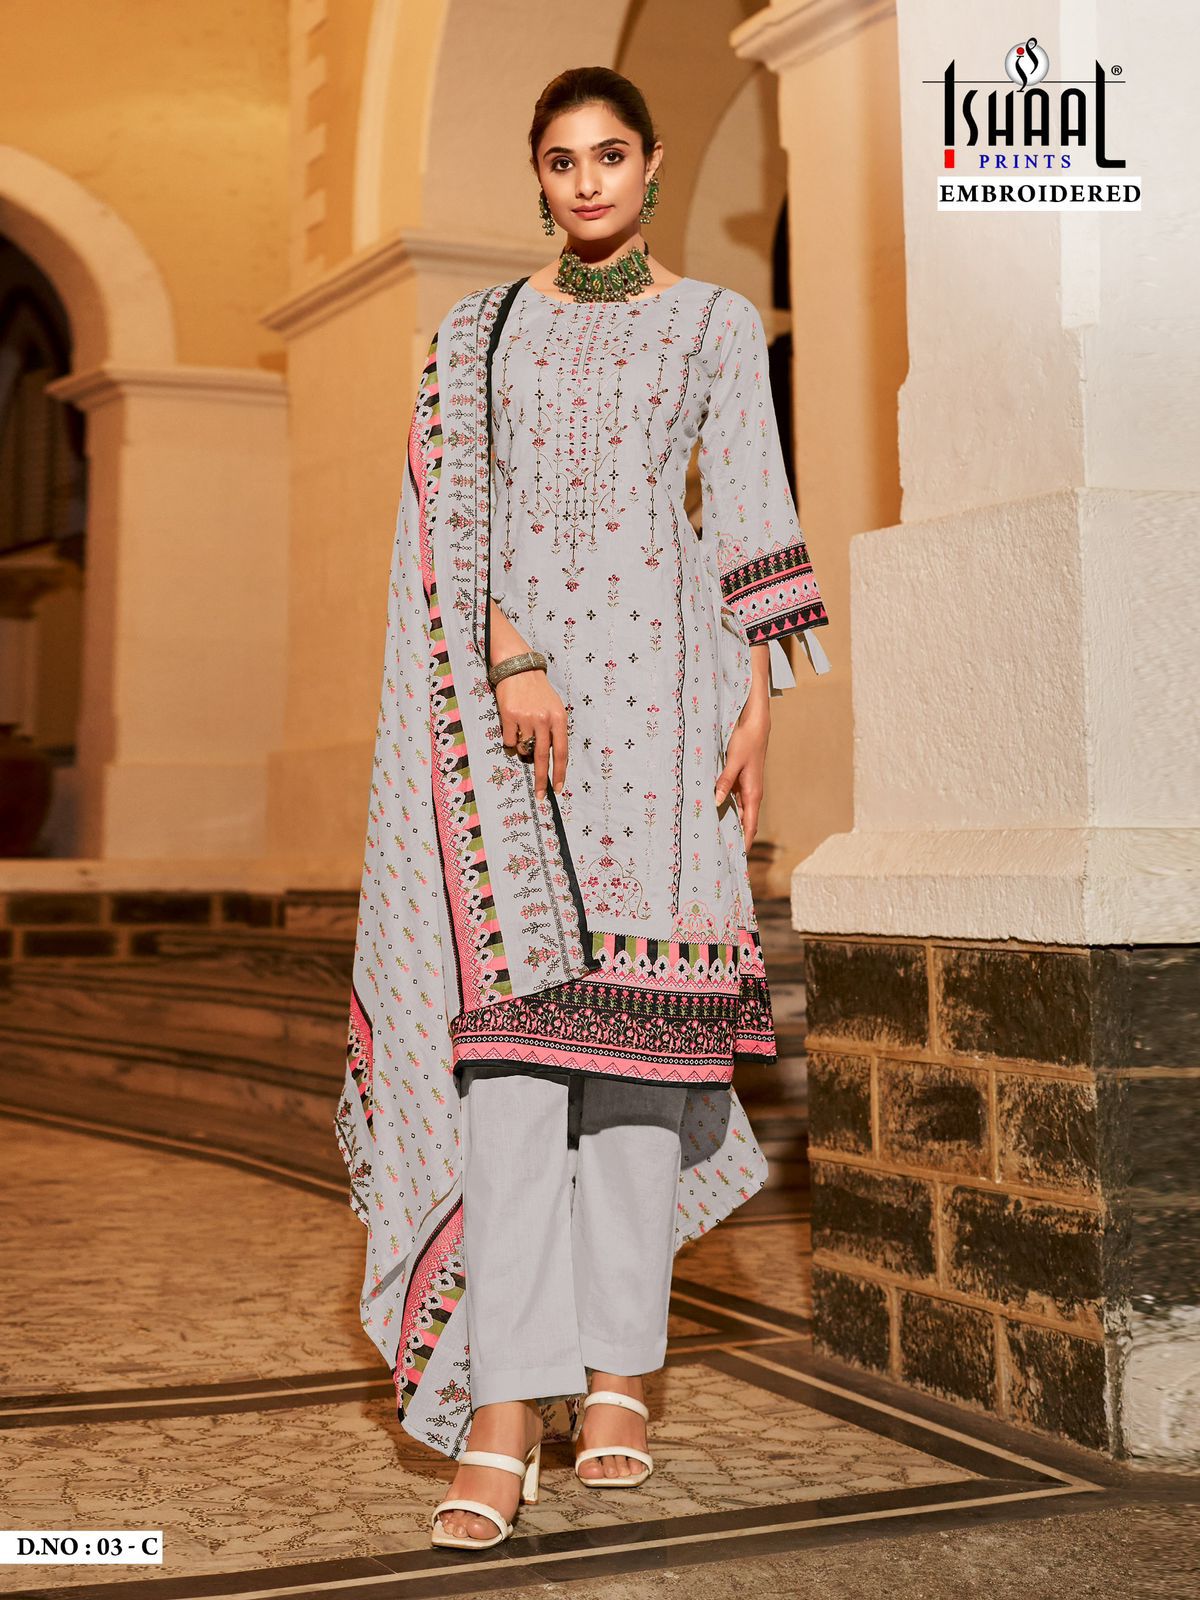 ISHAAL PRINTS EMBROIDERED LAWN SUITS